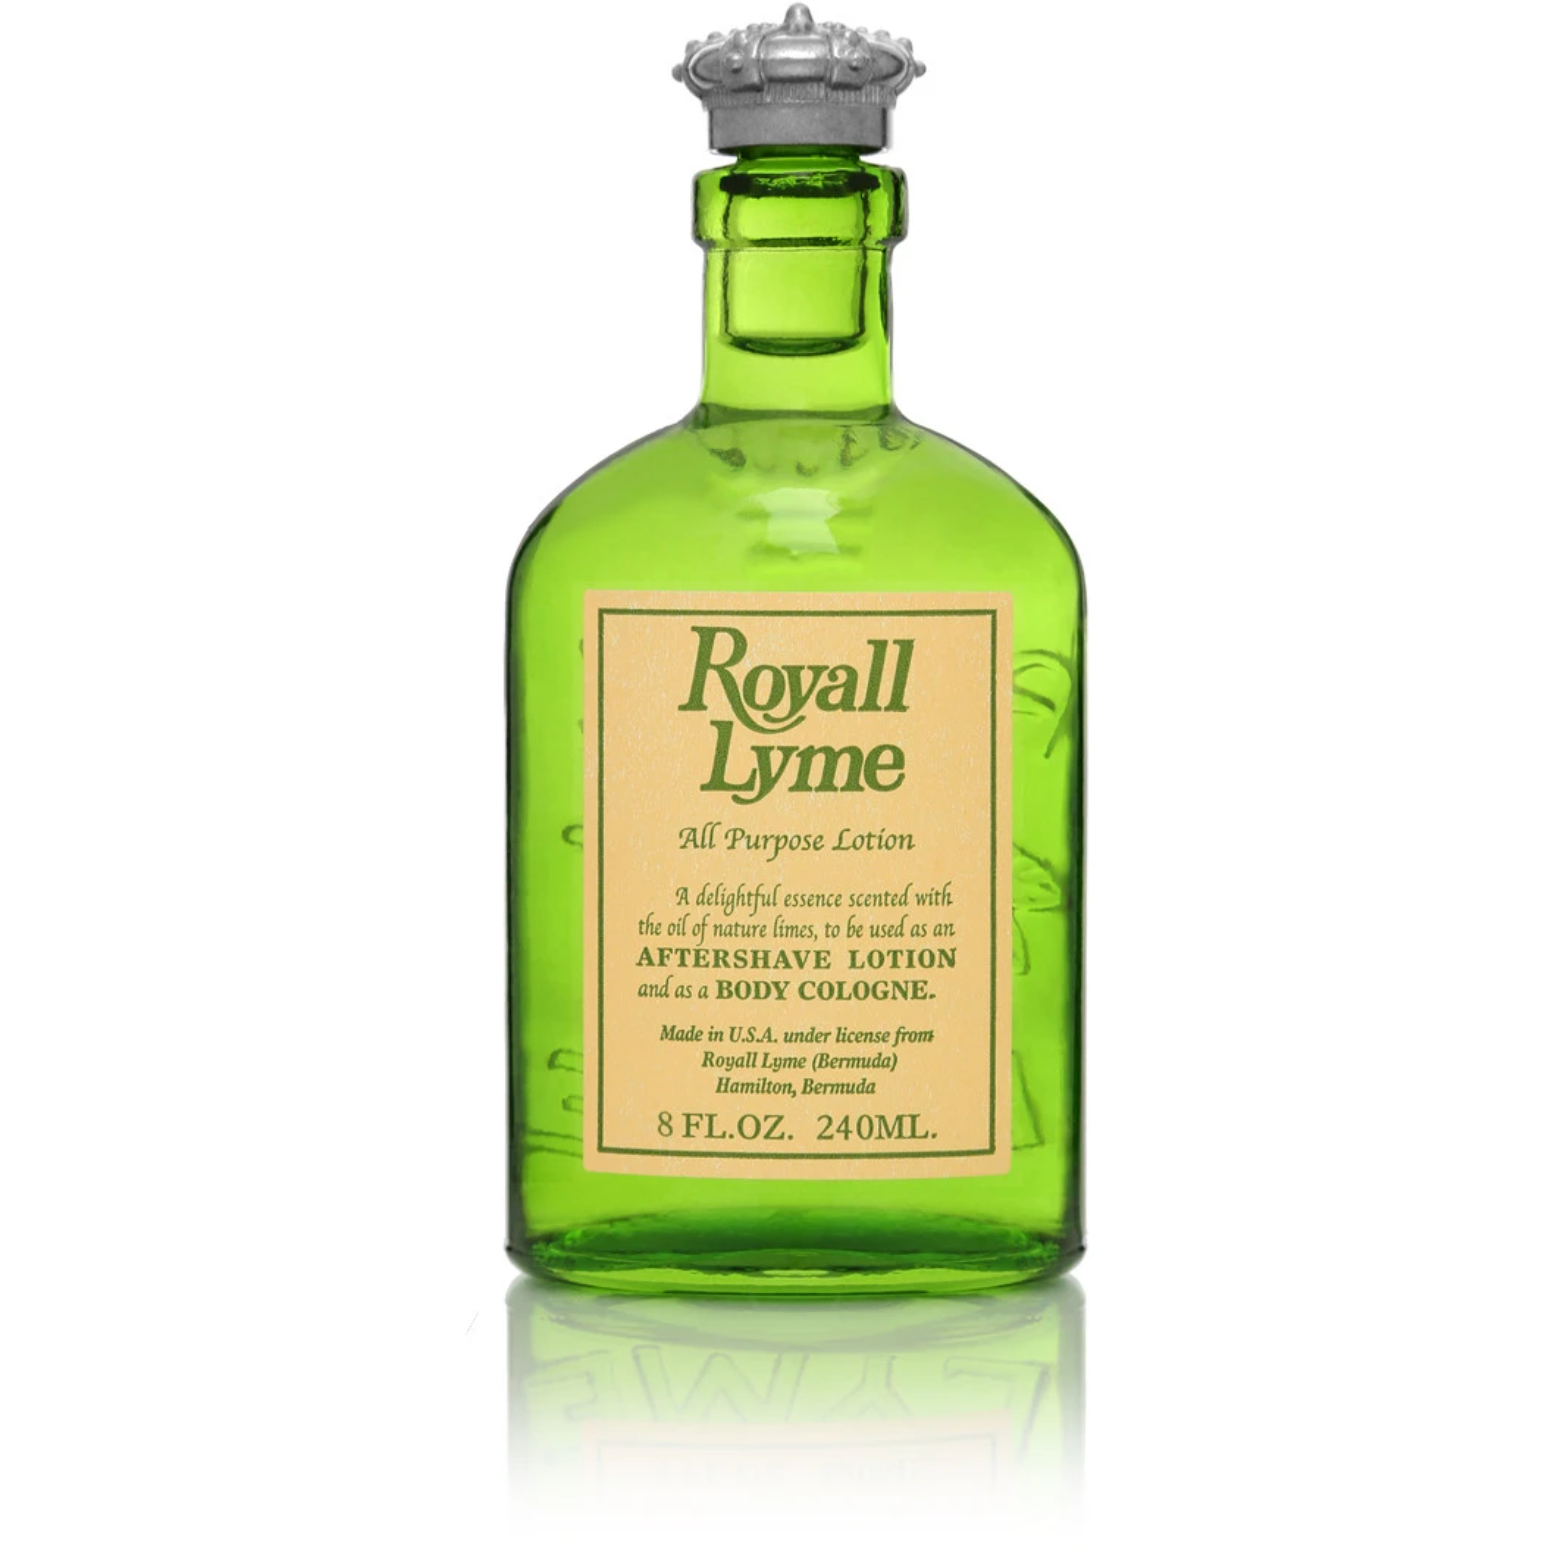 Royall Lyme All Purpose Lotion